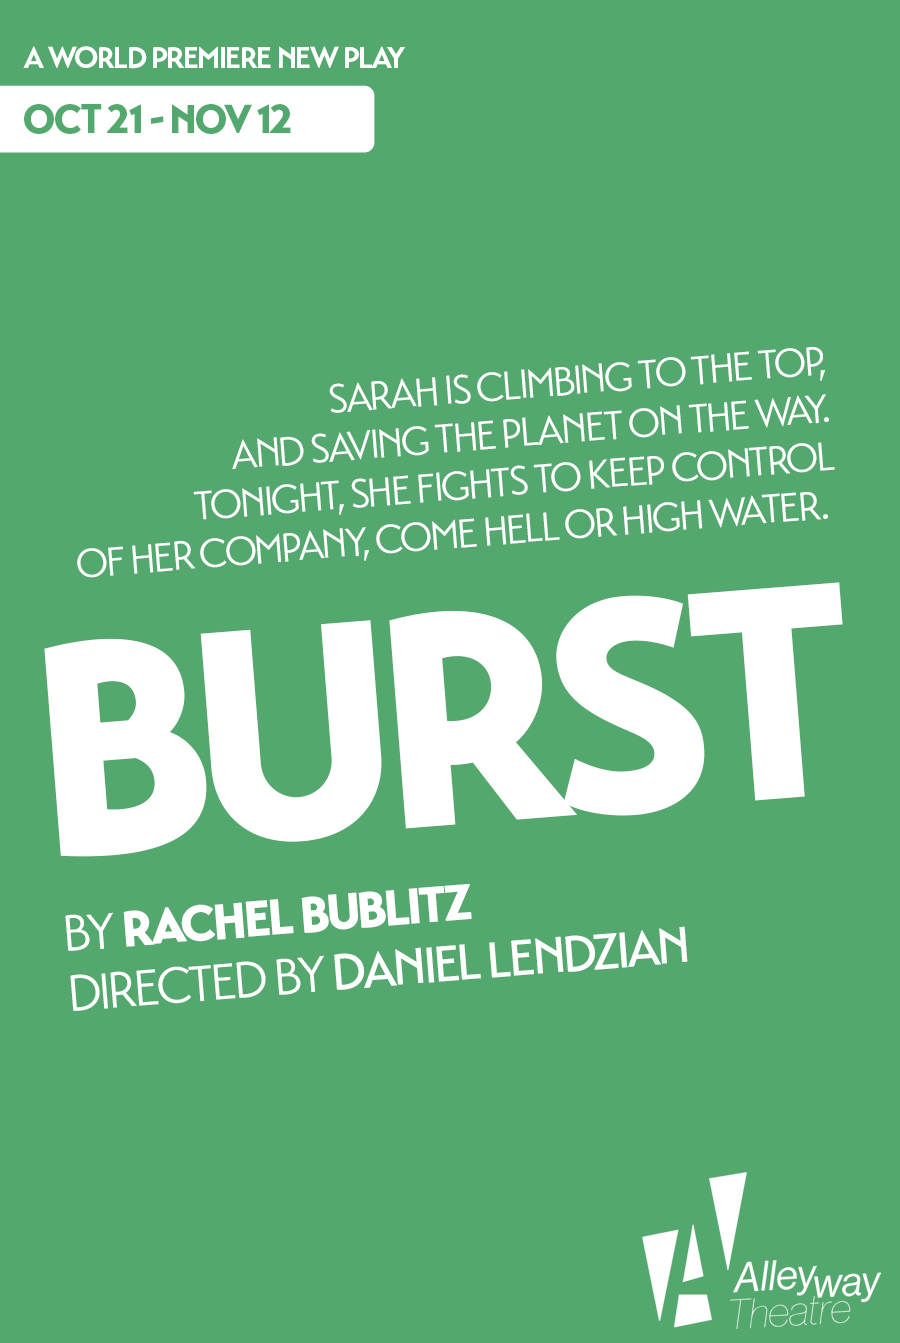 Promotional poster from the 2022 World Premiere of BURST at Alleyway Theatre.